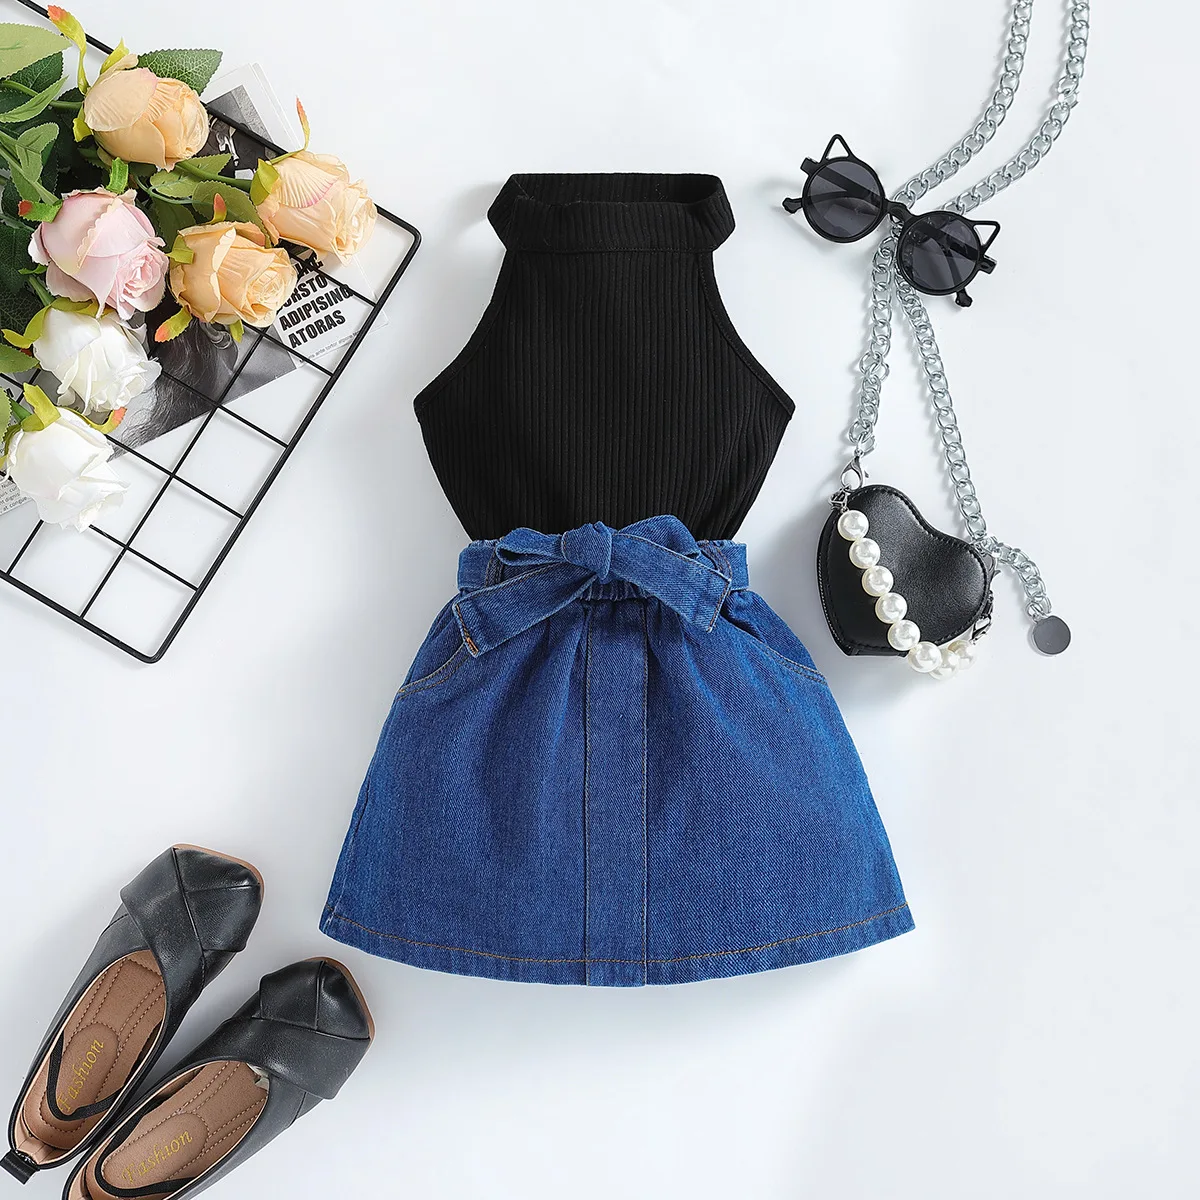 New casual children's clothing sleeveless pit strip vest+denim skirt two piece boutique kids clothing girls outfits